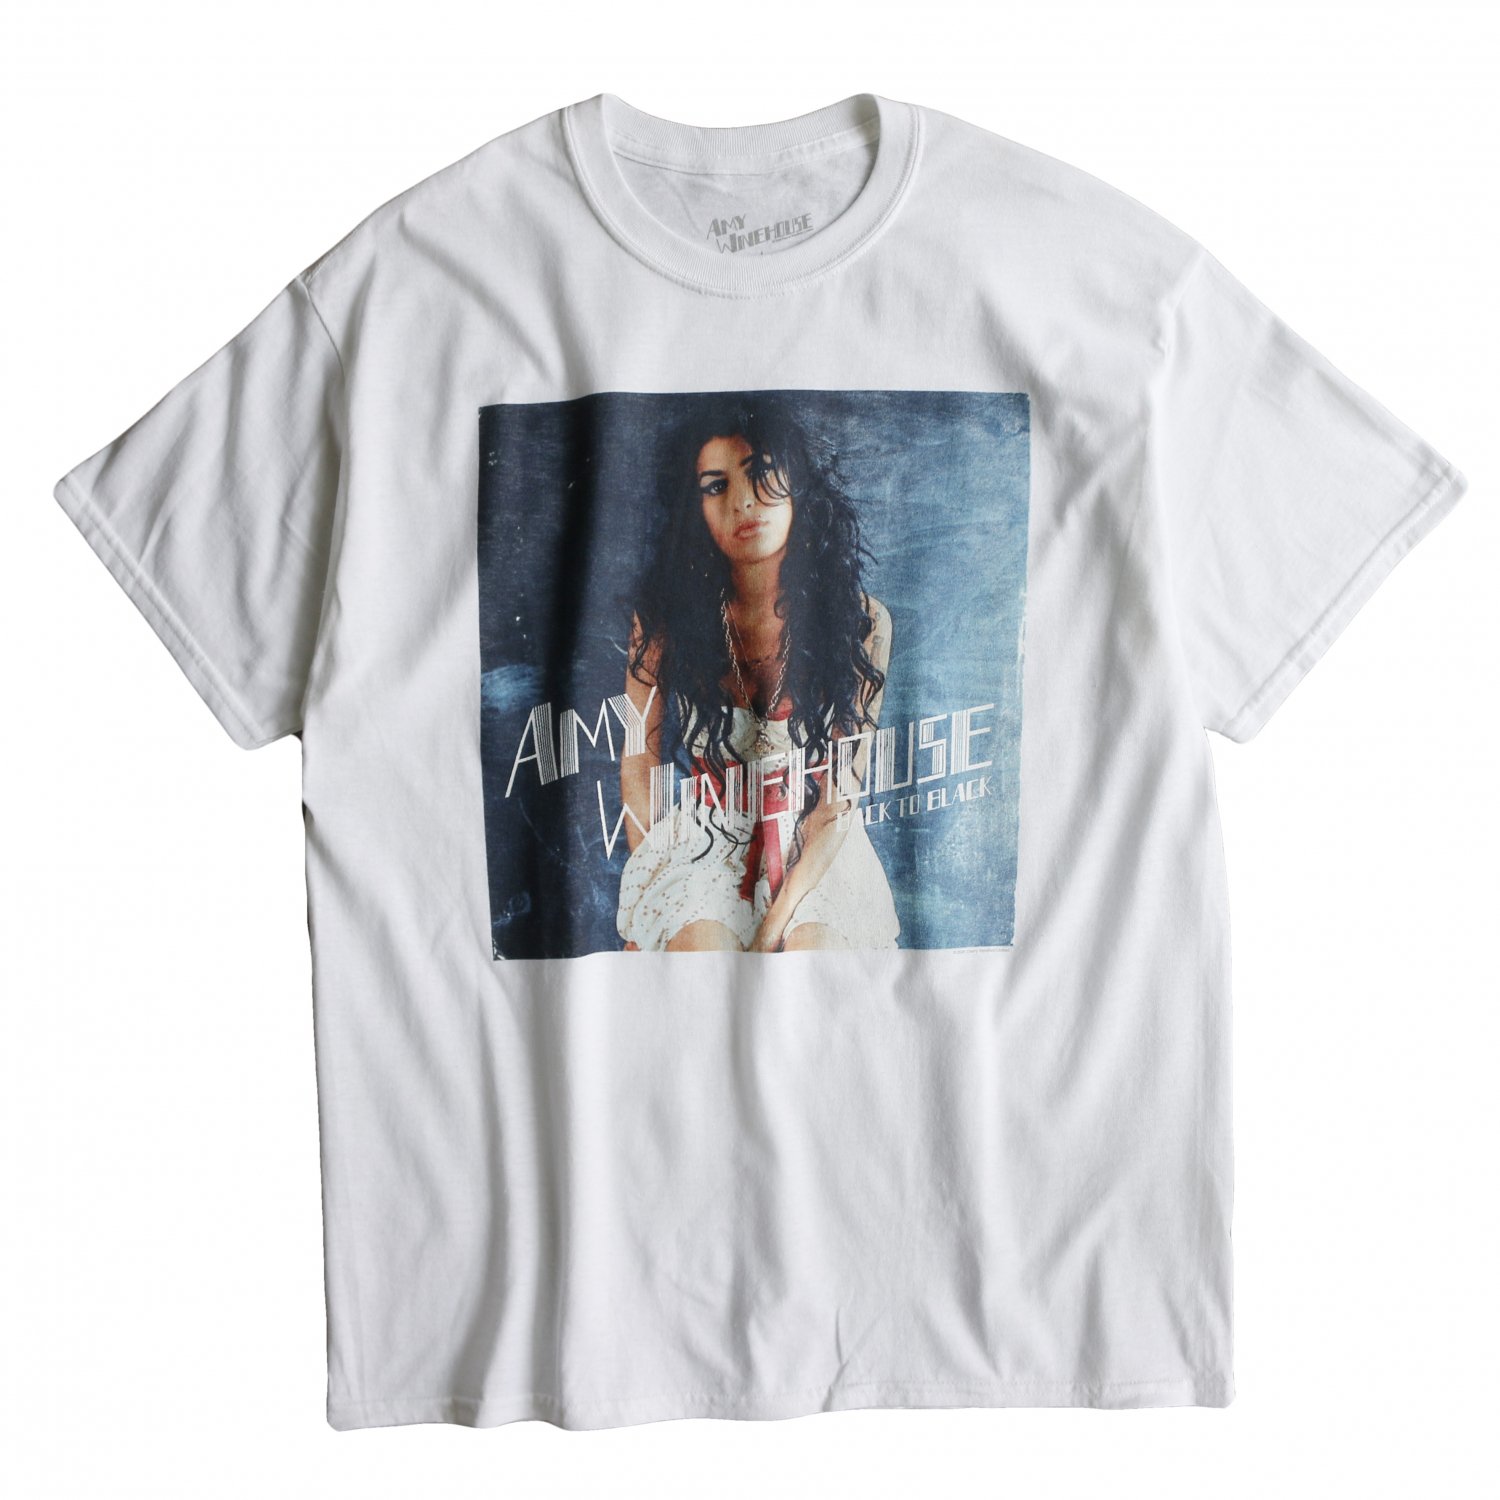 <img class='new_mark_img1' src='https://img.shop-pro.jp/img/new/icons8.gif' style='border:none;display:inline;margin:0px;padding:0px;width:auto;' />Music Tee / S/S TEE AMY WINEHOUSEAMY